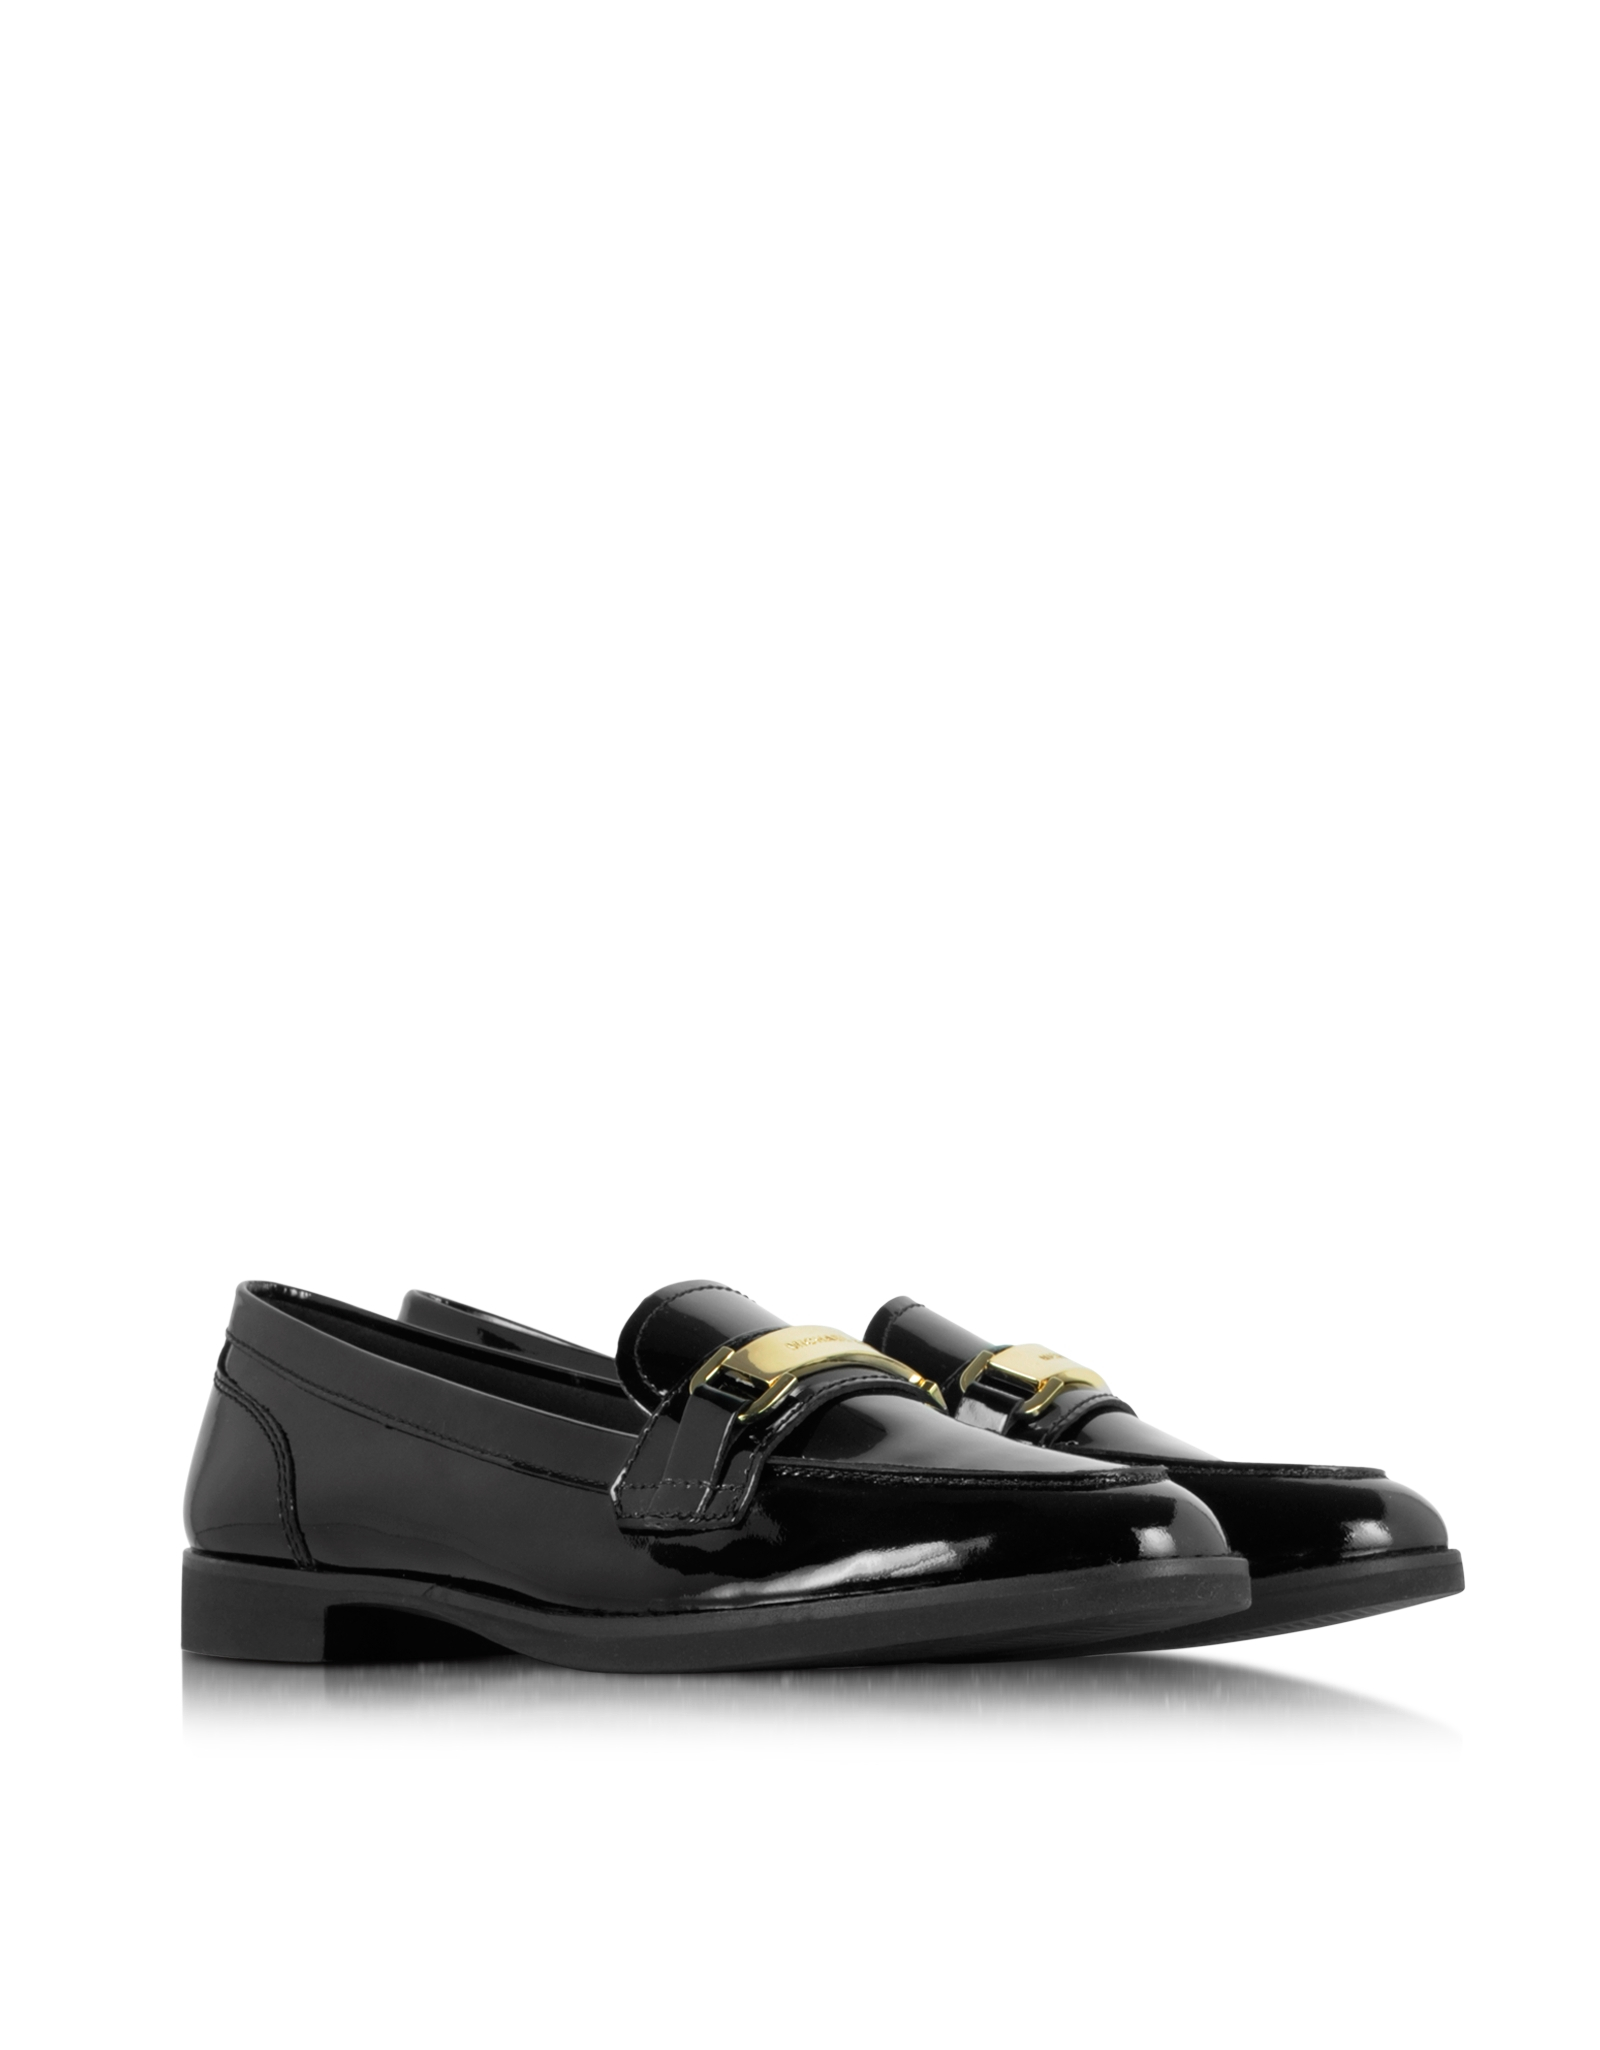 Lyst - Michael Kors Ansley Black Patent Leather Loafer in Black